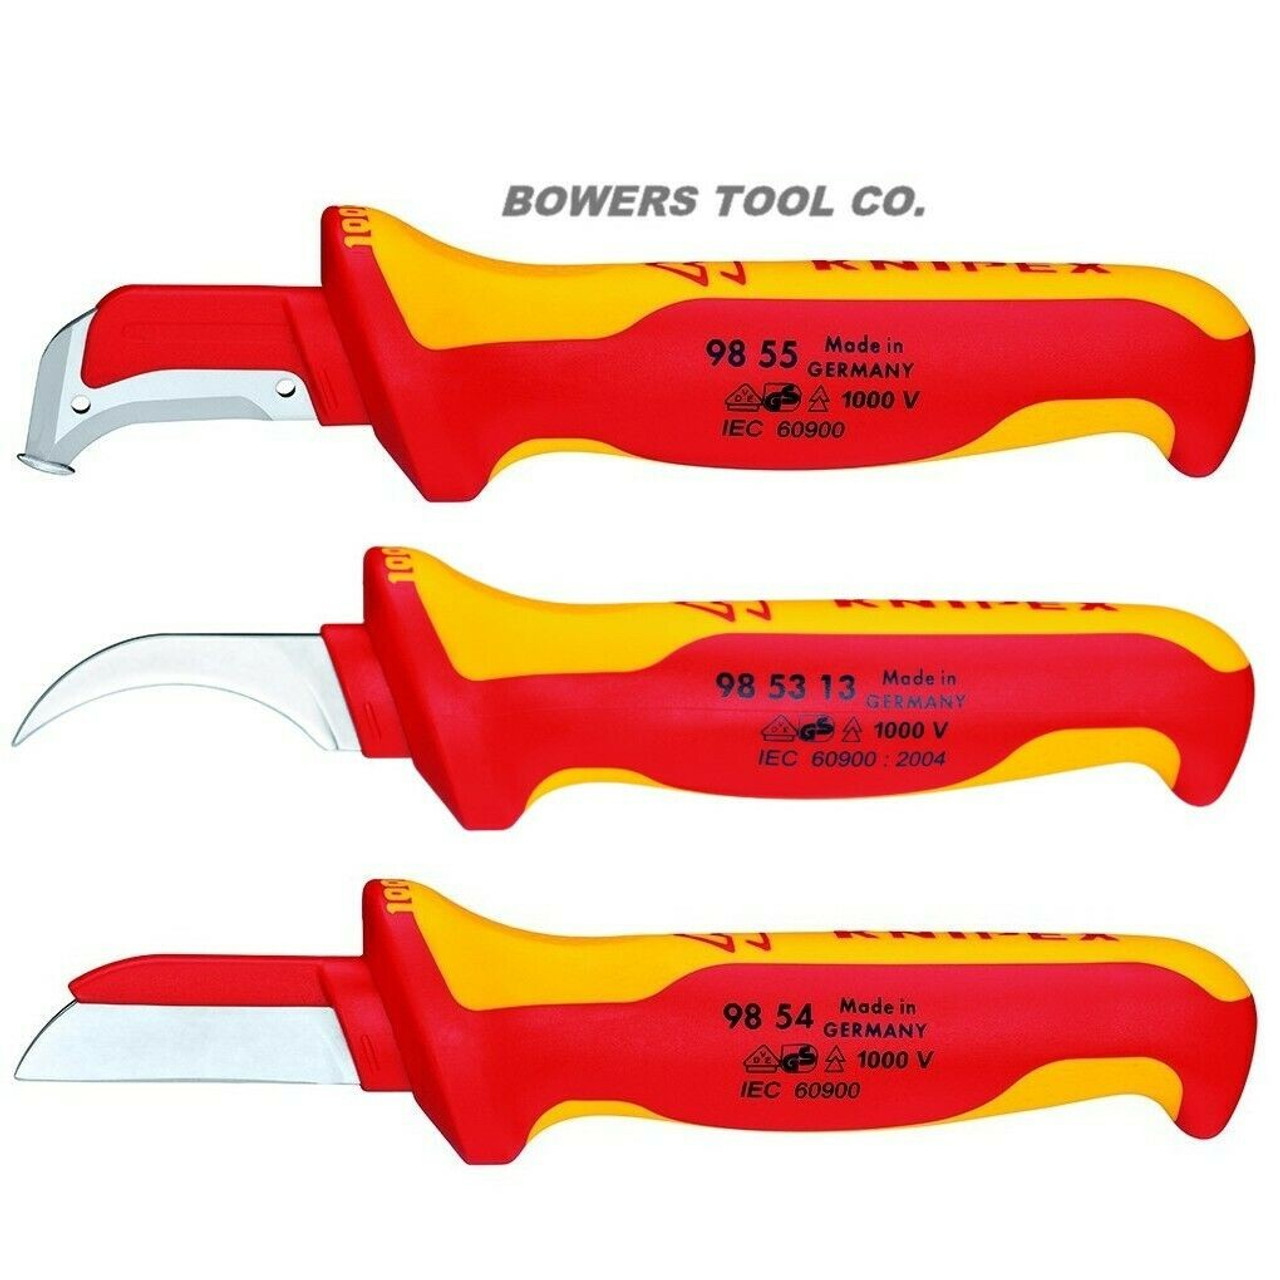 Knipex 3pc Cable Dismantling Knife Set Surgical Steel Shoe Hook Straight 1000V Bowers Tool Co.